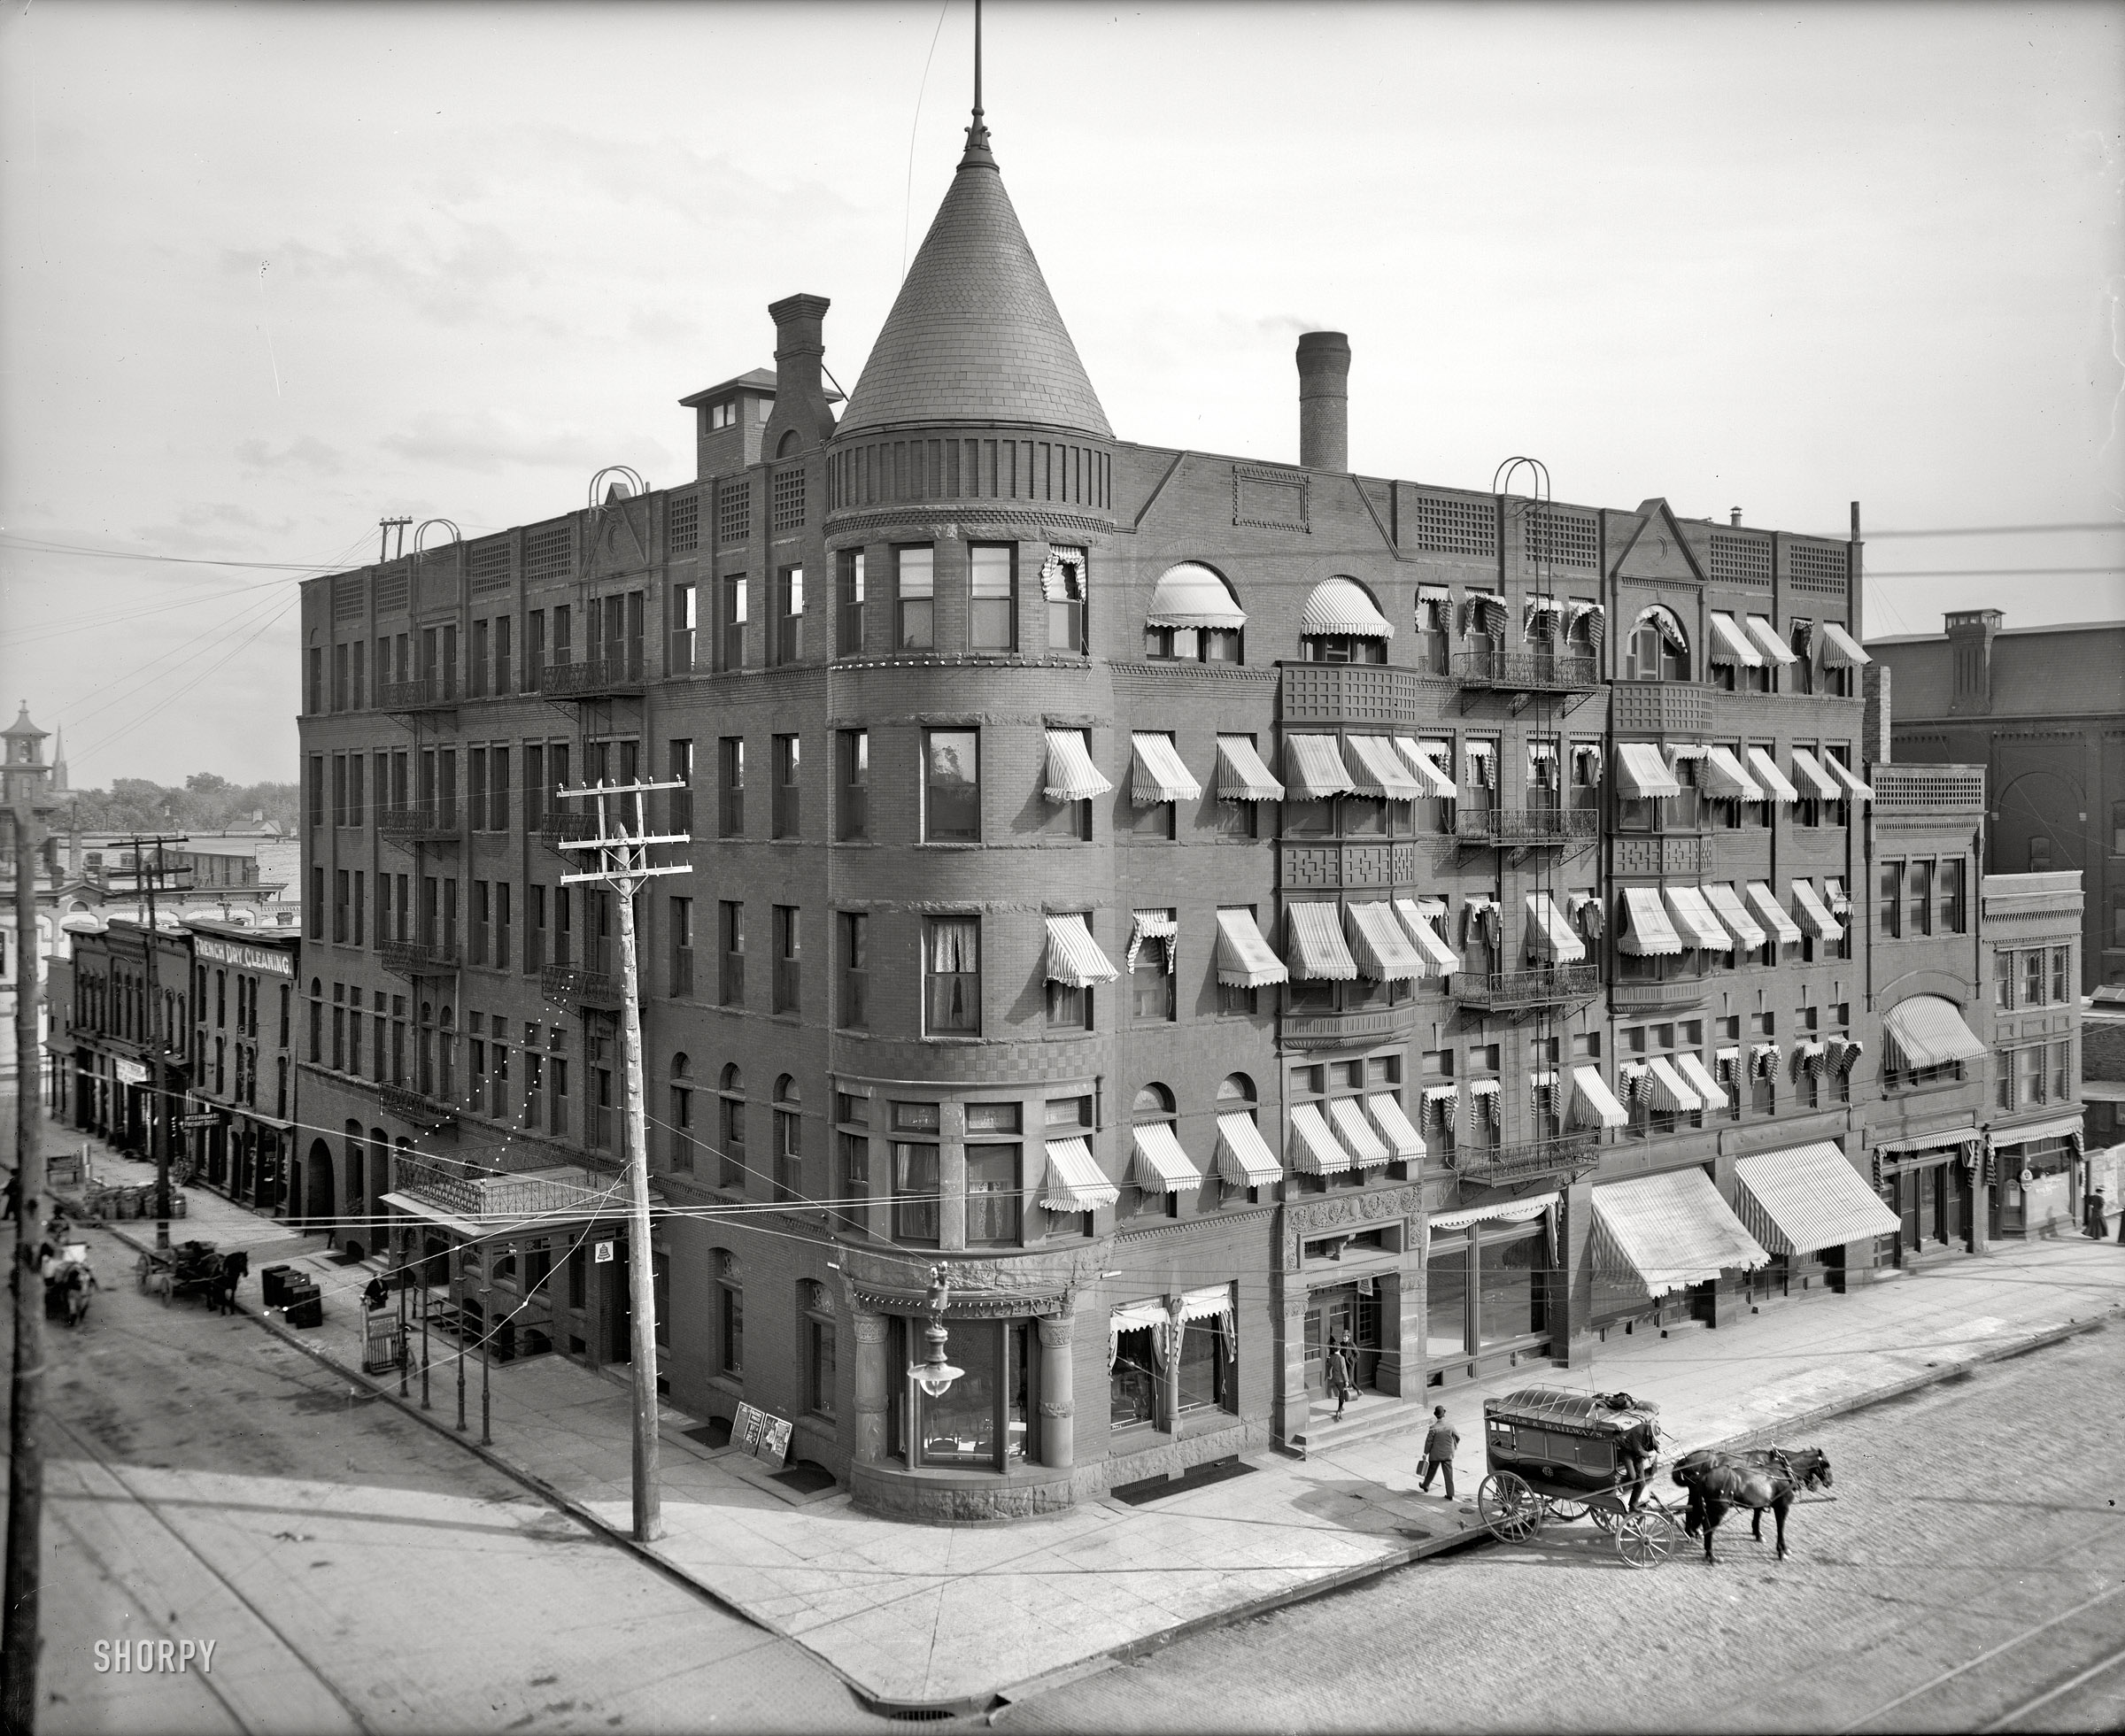 Saginaw, Michigan, circa 1905. "Hotel Vincent." Try our depot shuttle. 8x10 inch dry plate glass negative, Detroit Publishing Company. View full size.